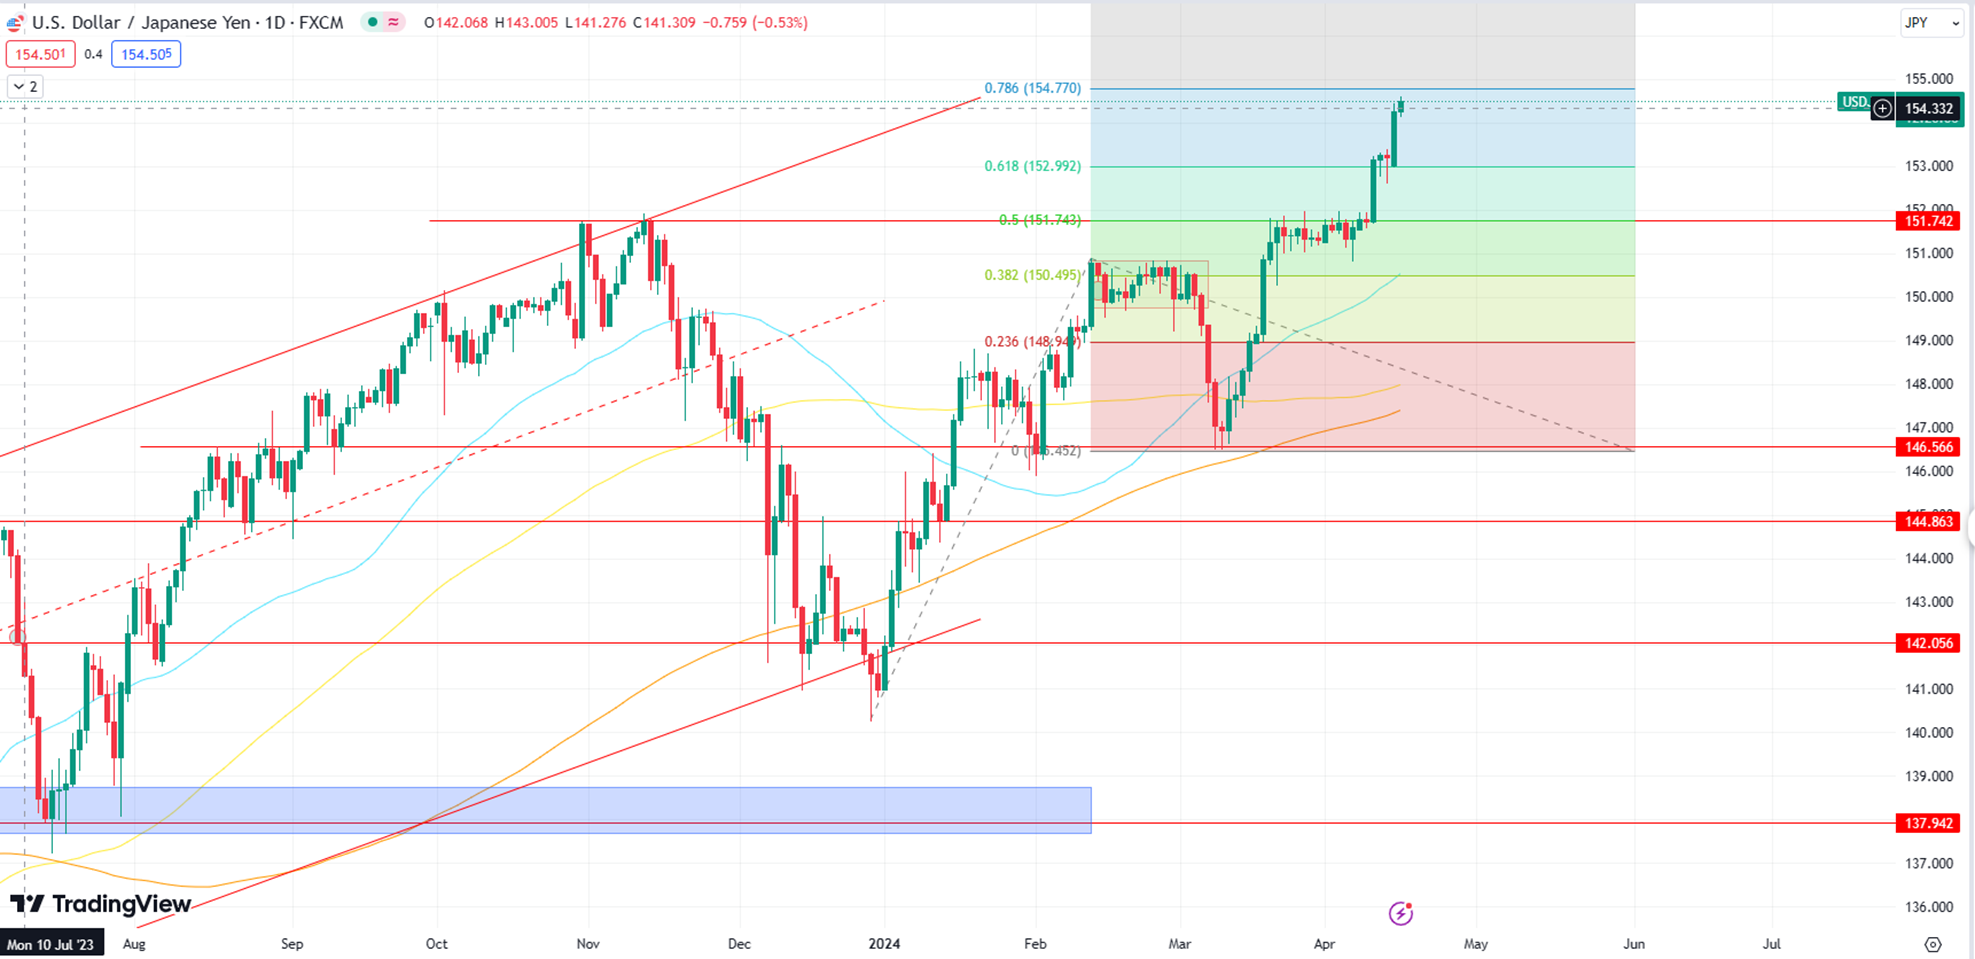 USD/JPY Surges to New Highs, Targets 155 Amid Fed-BOJ Policy Divergence